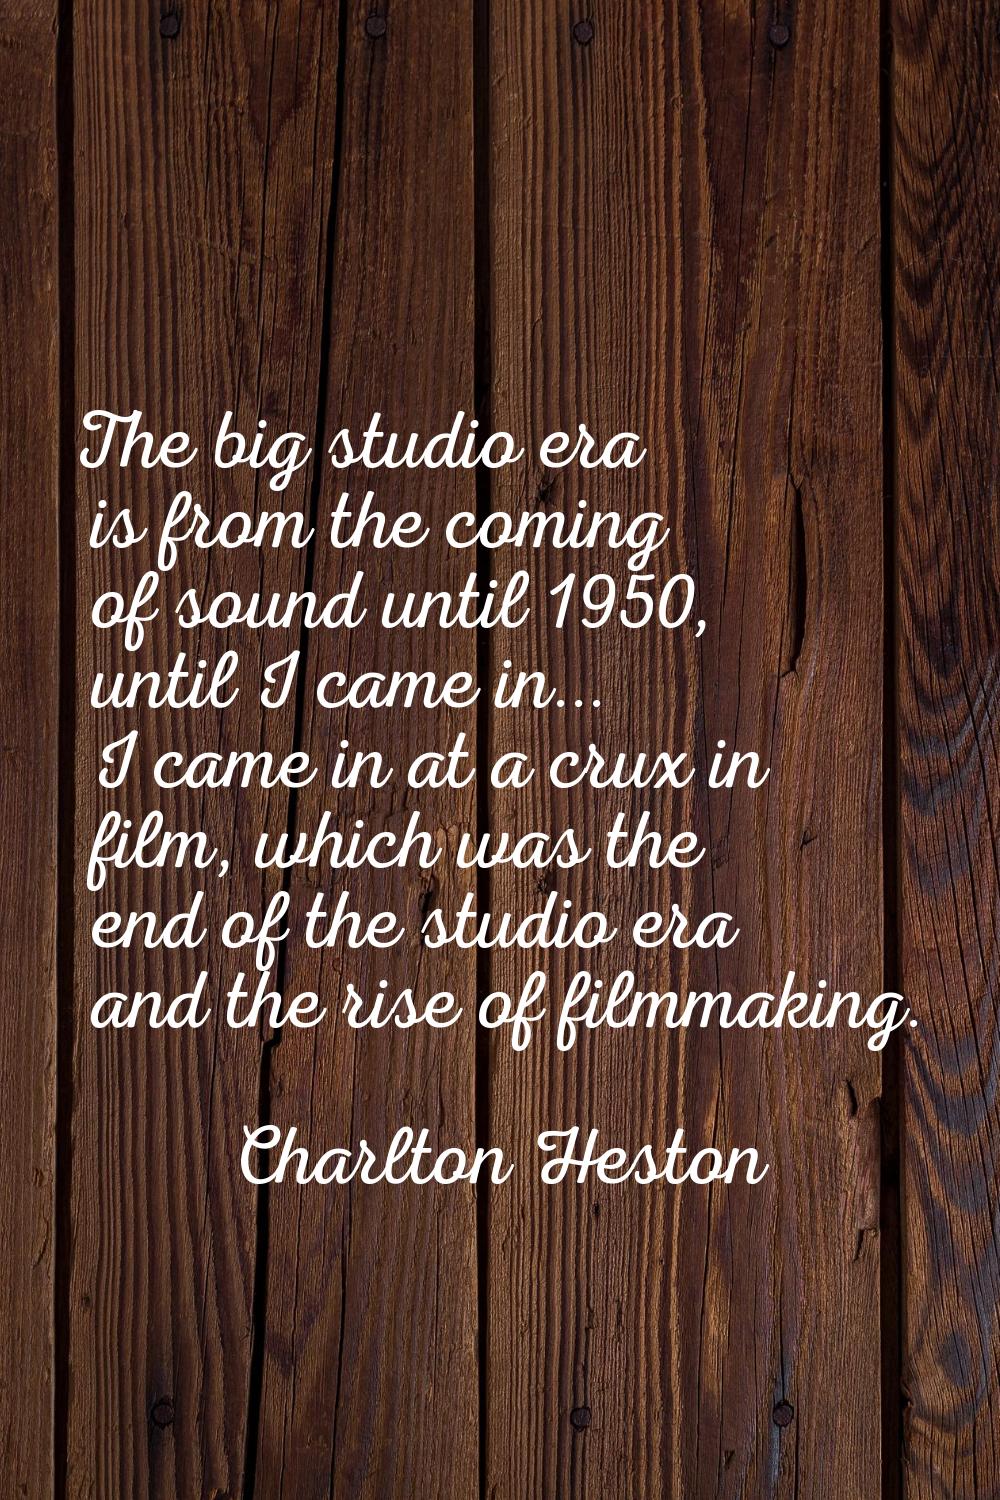 The big studio era is from the coming of sound until 1950, until I came in... I came in at a crux i